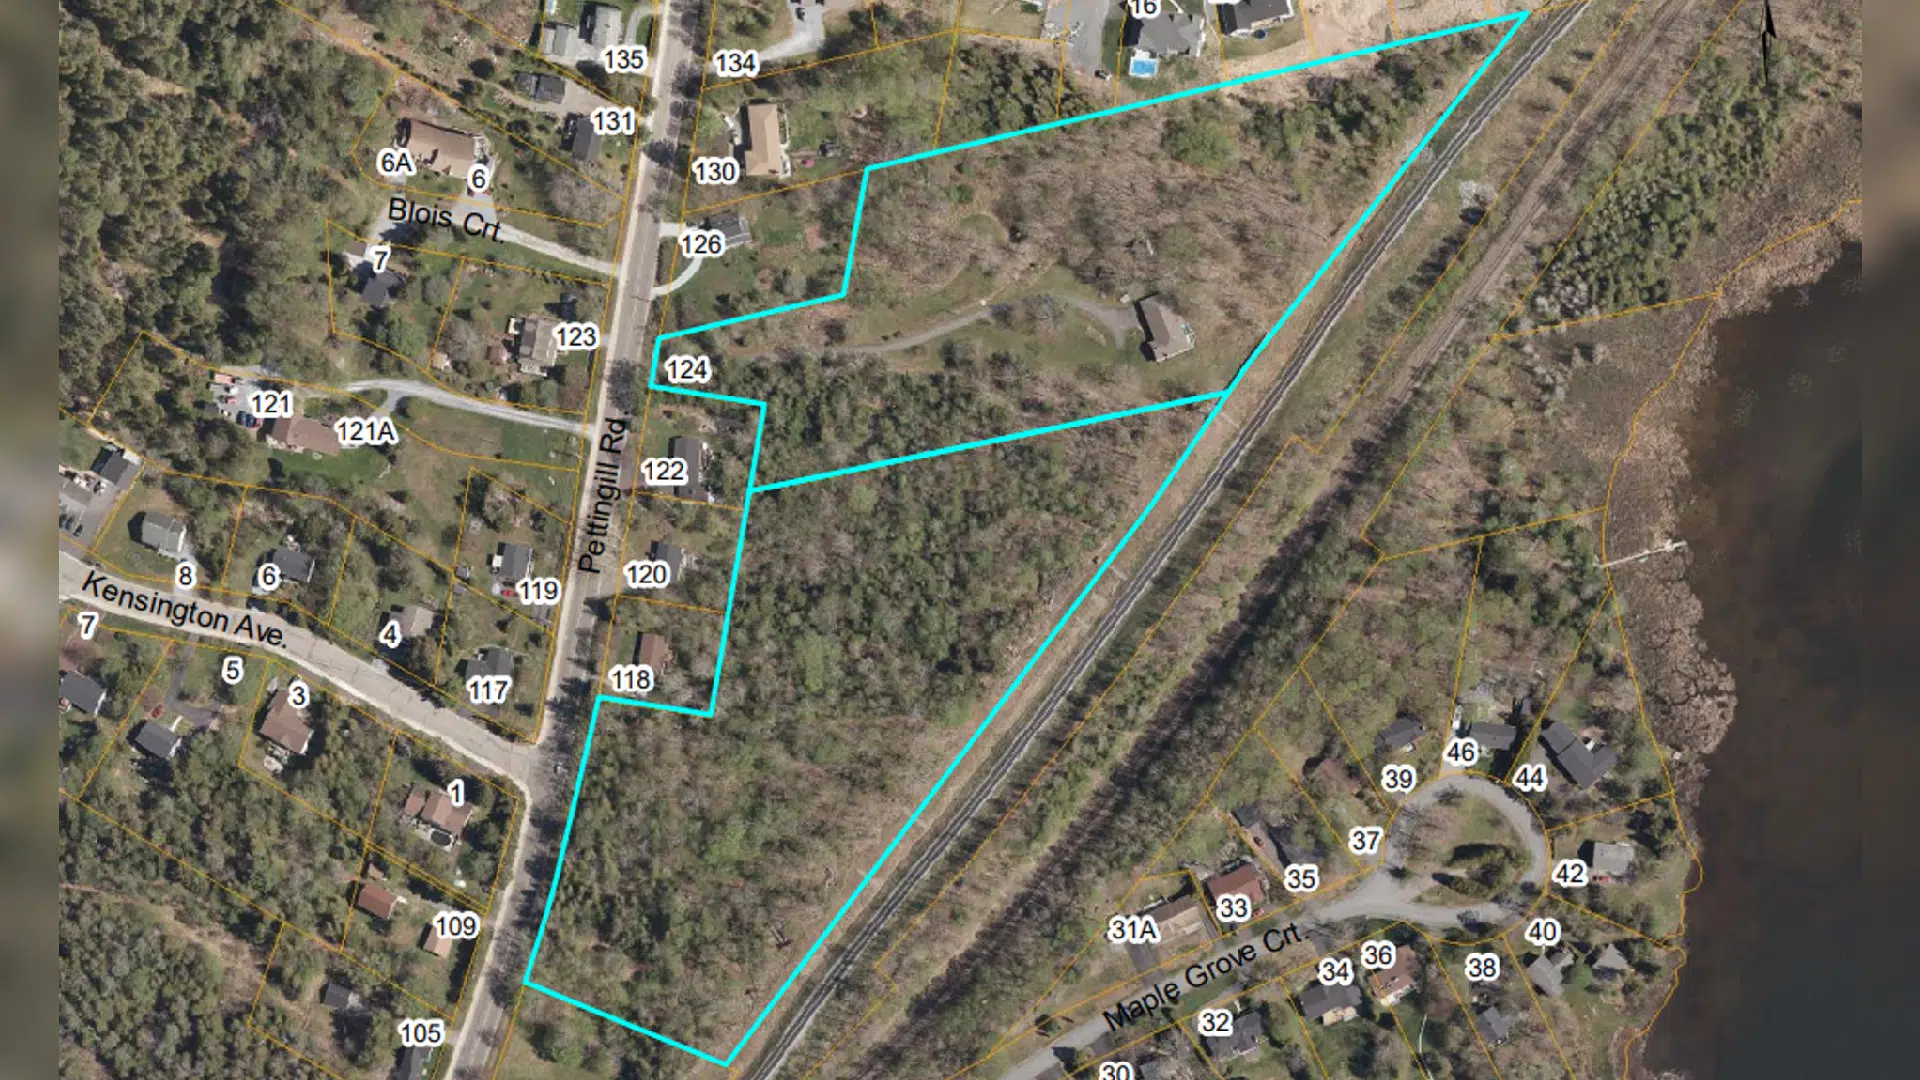 44 Terrace Homes Proposed For Quispamsis